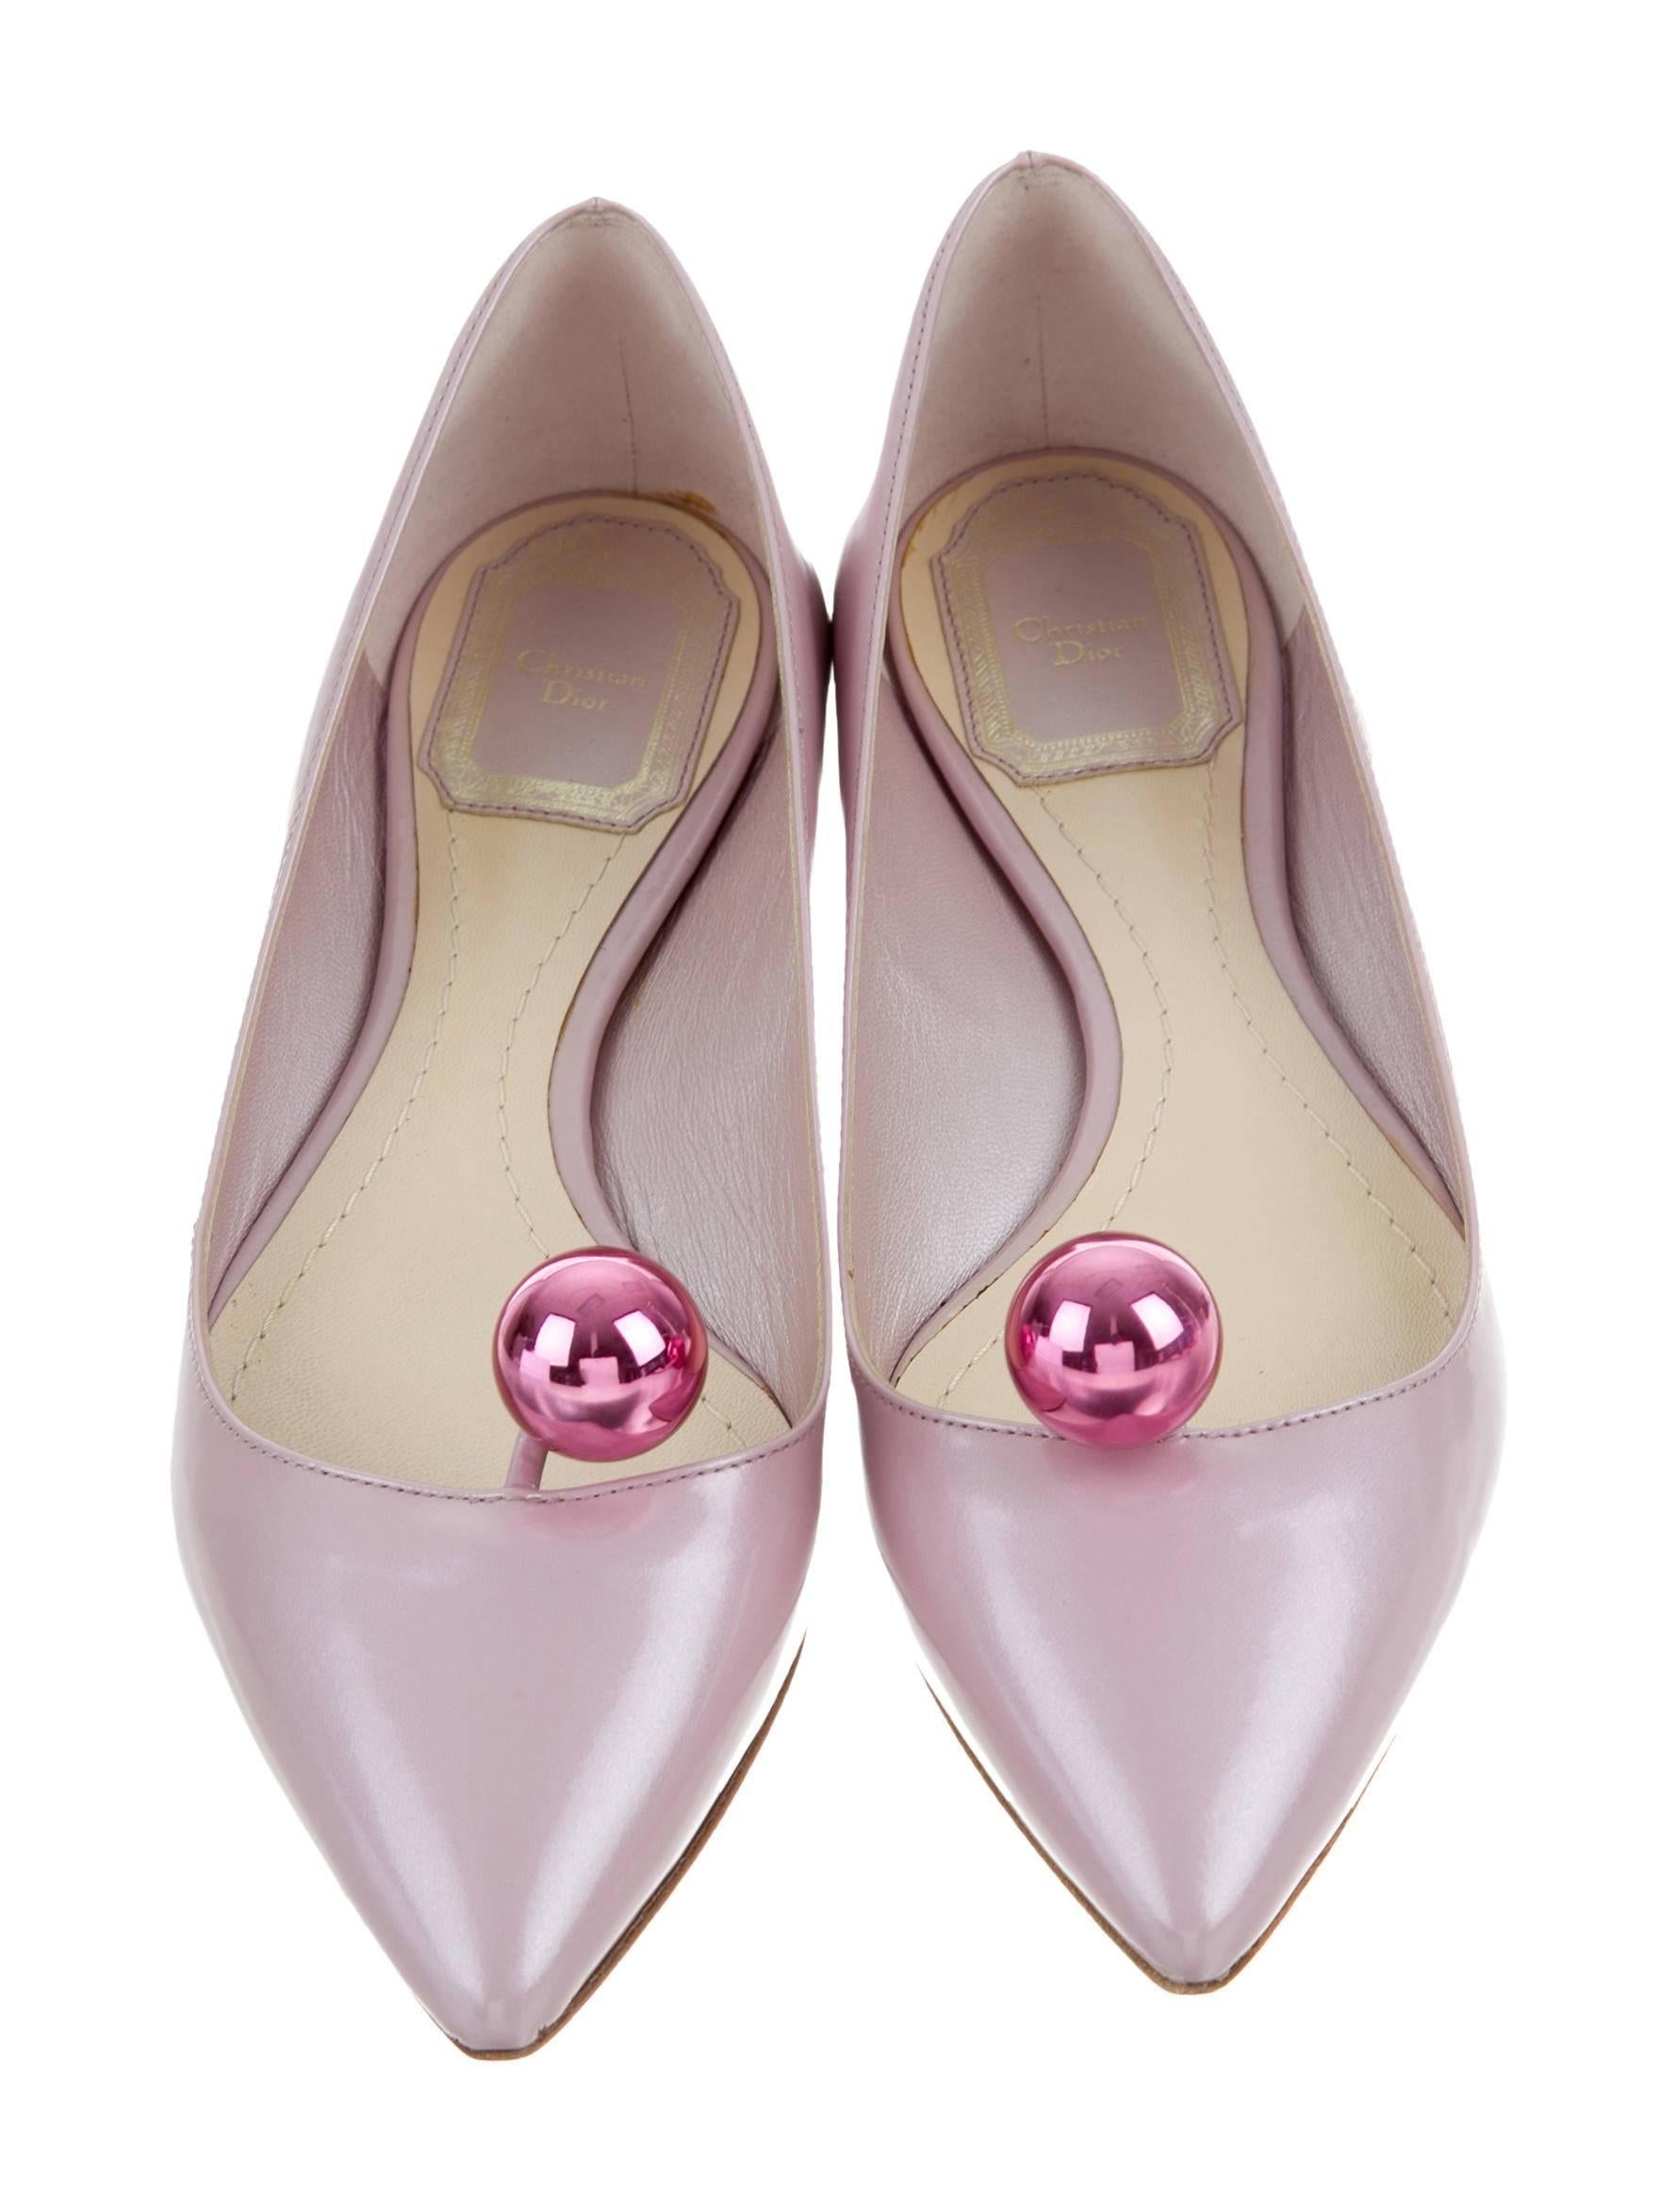 CURATOR'S NOTES

Christian Dior NEW & SOLD Pink Patent Ball Evening Flats in Box 

Size IT 36
Patent leather
Made in Italy
Heel height 0.25